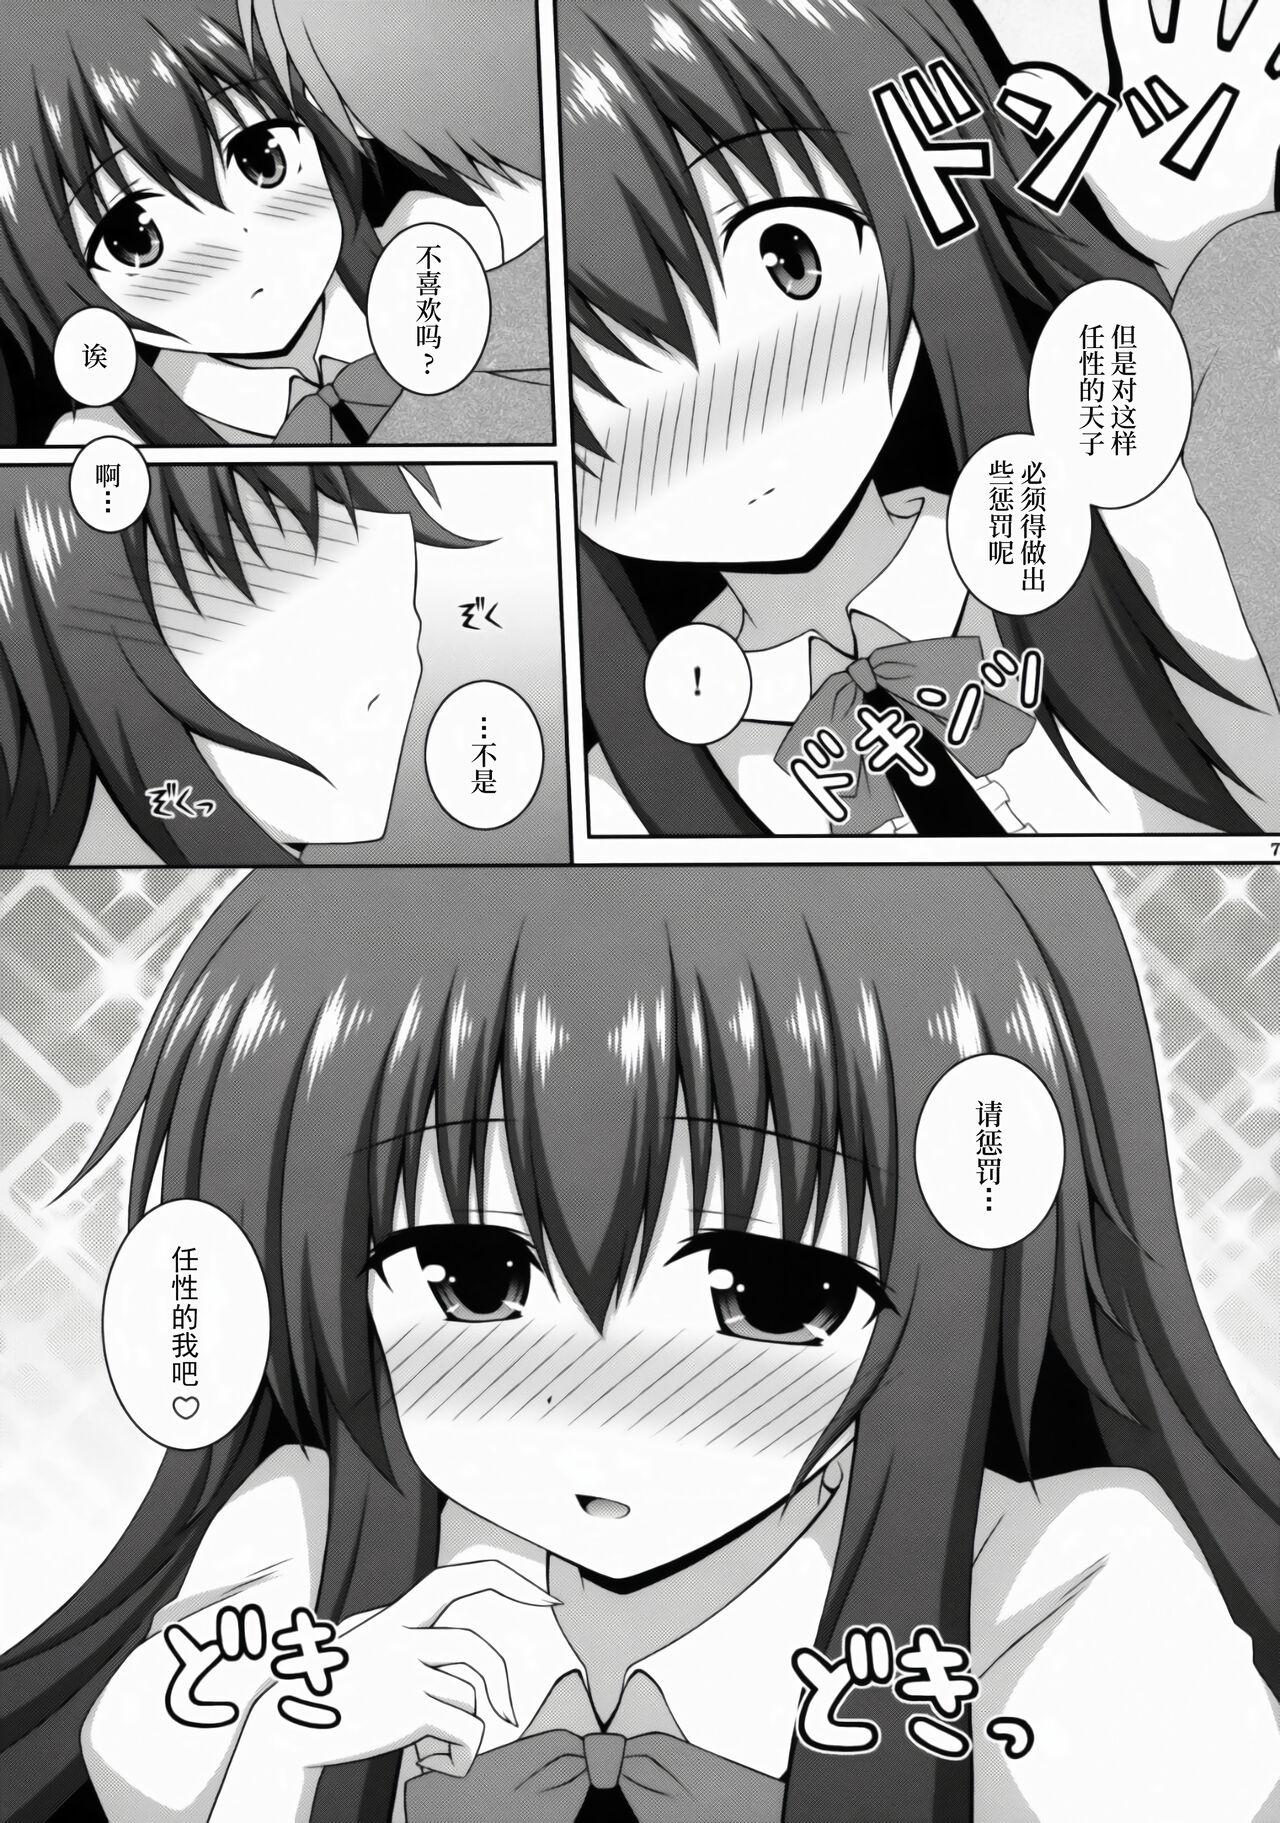 Chacal Selfish Angel | 任性的天使 - Touhou project Oral Sex - Page 7